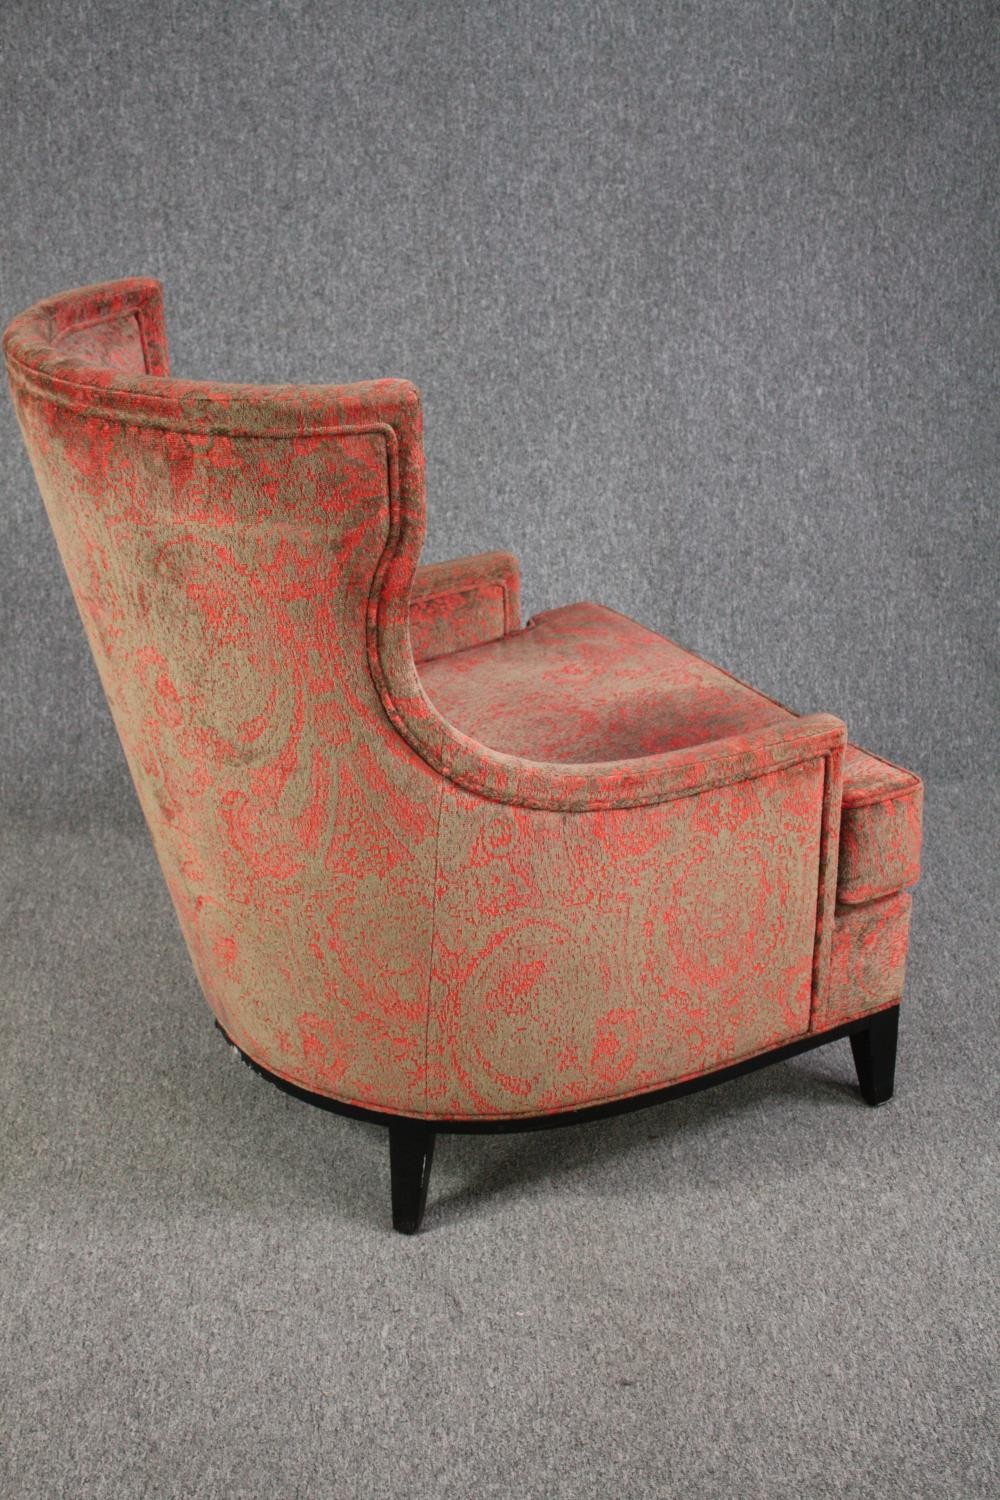 Armchairs, pair contemporary upholstered. H.100 W.176cm.(each) - Image 4 of 6